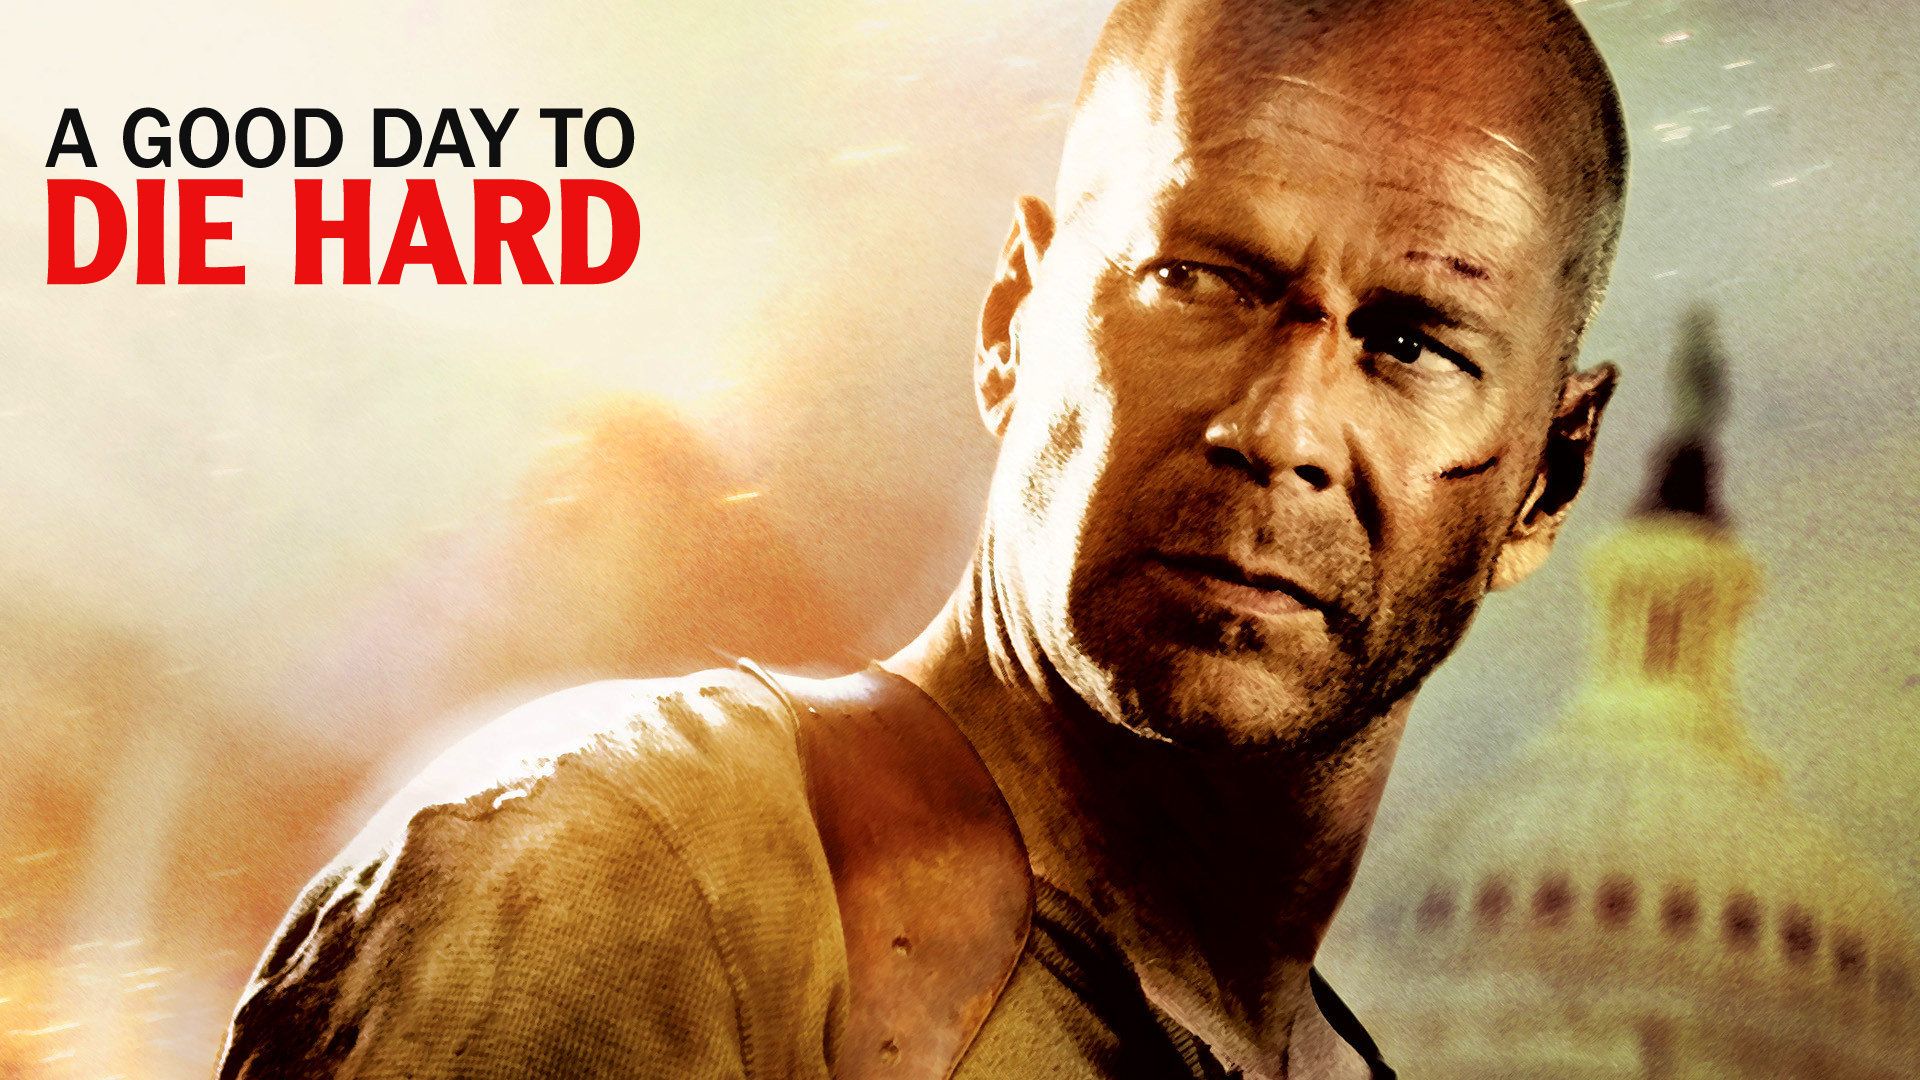 A Good Day To Die Hard wallpaper, Movie, HQ A Good Day To Die Hard pictureK Wallpaper 2019